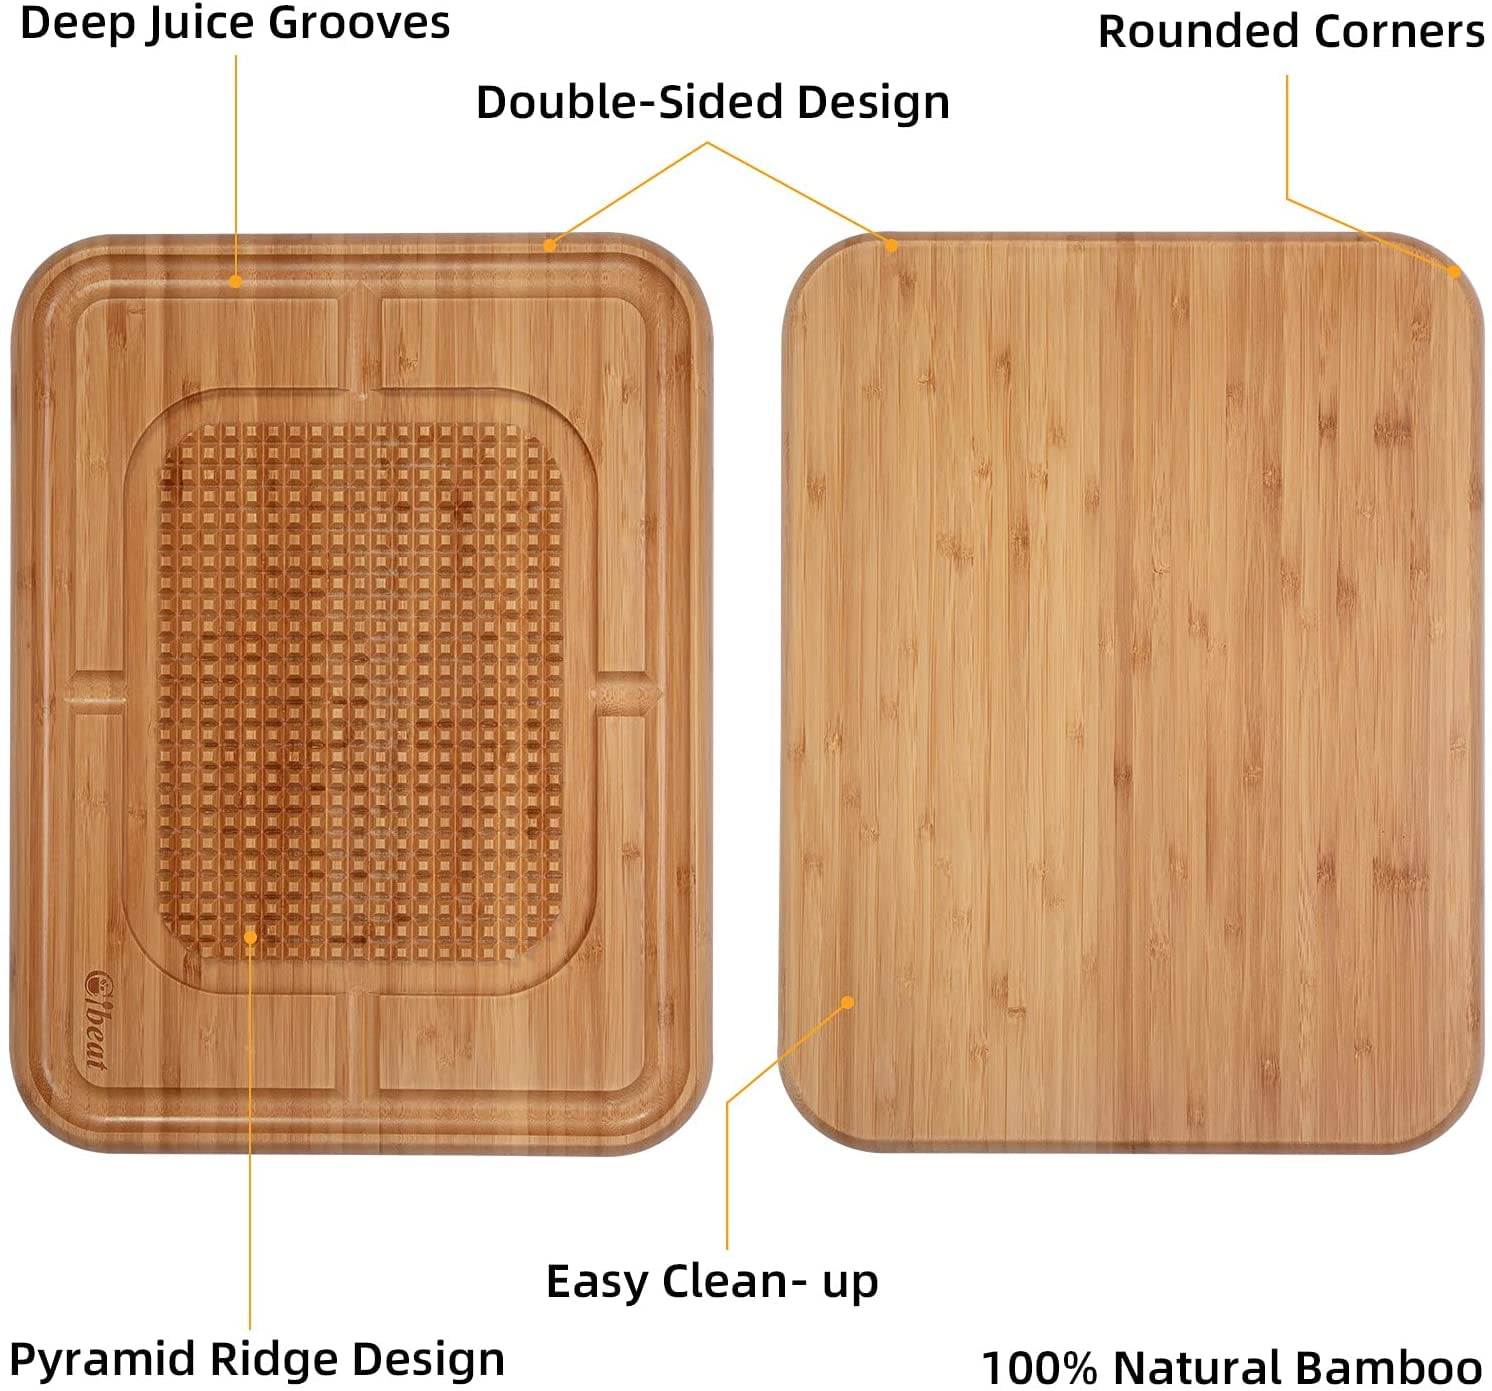 Crandek Corner Counter Cutting Board for Kitchen - Bamboo Wooden Chopping Block with Juice Groove - Fits Inner Corner of Countertops - Solid Natural